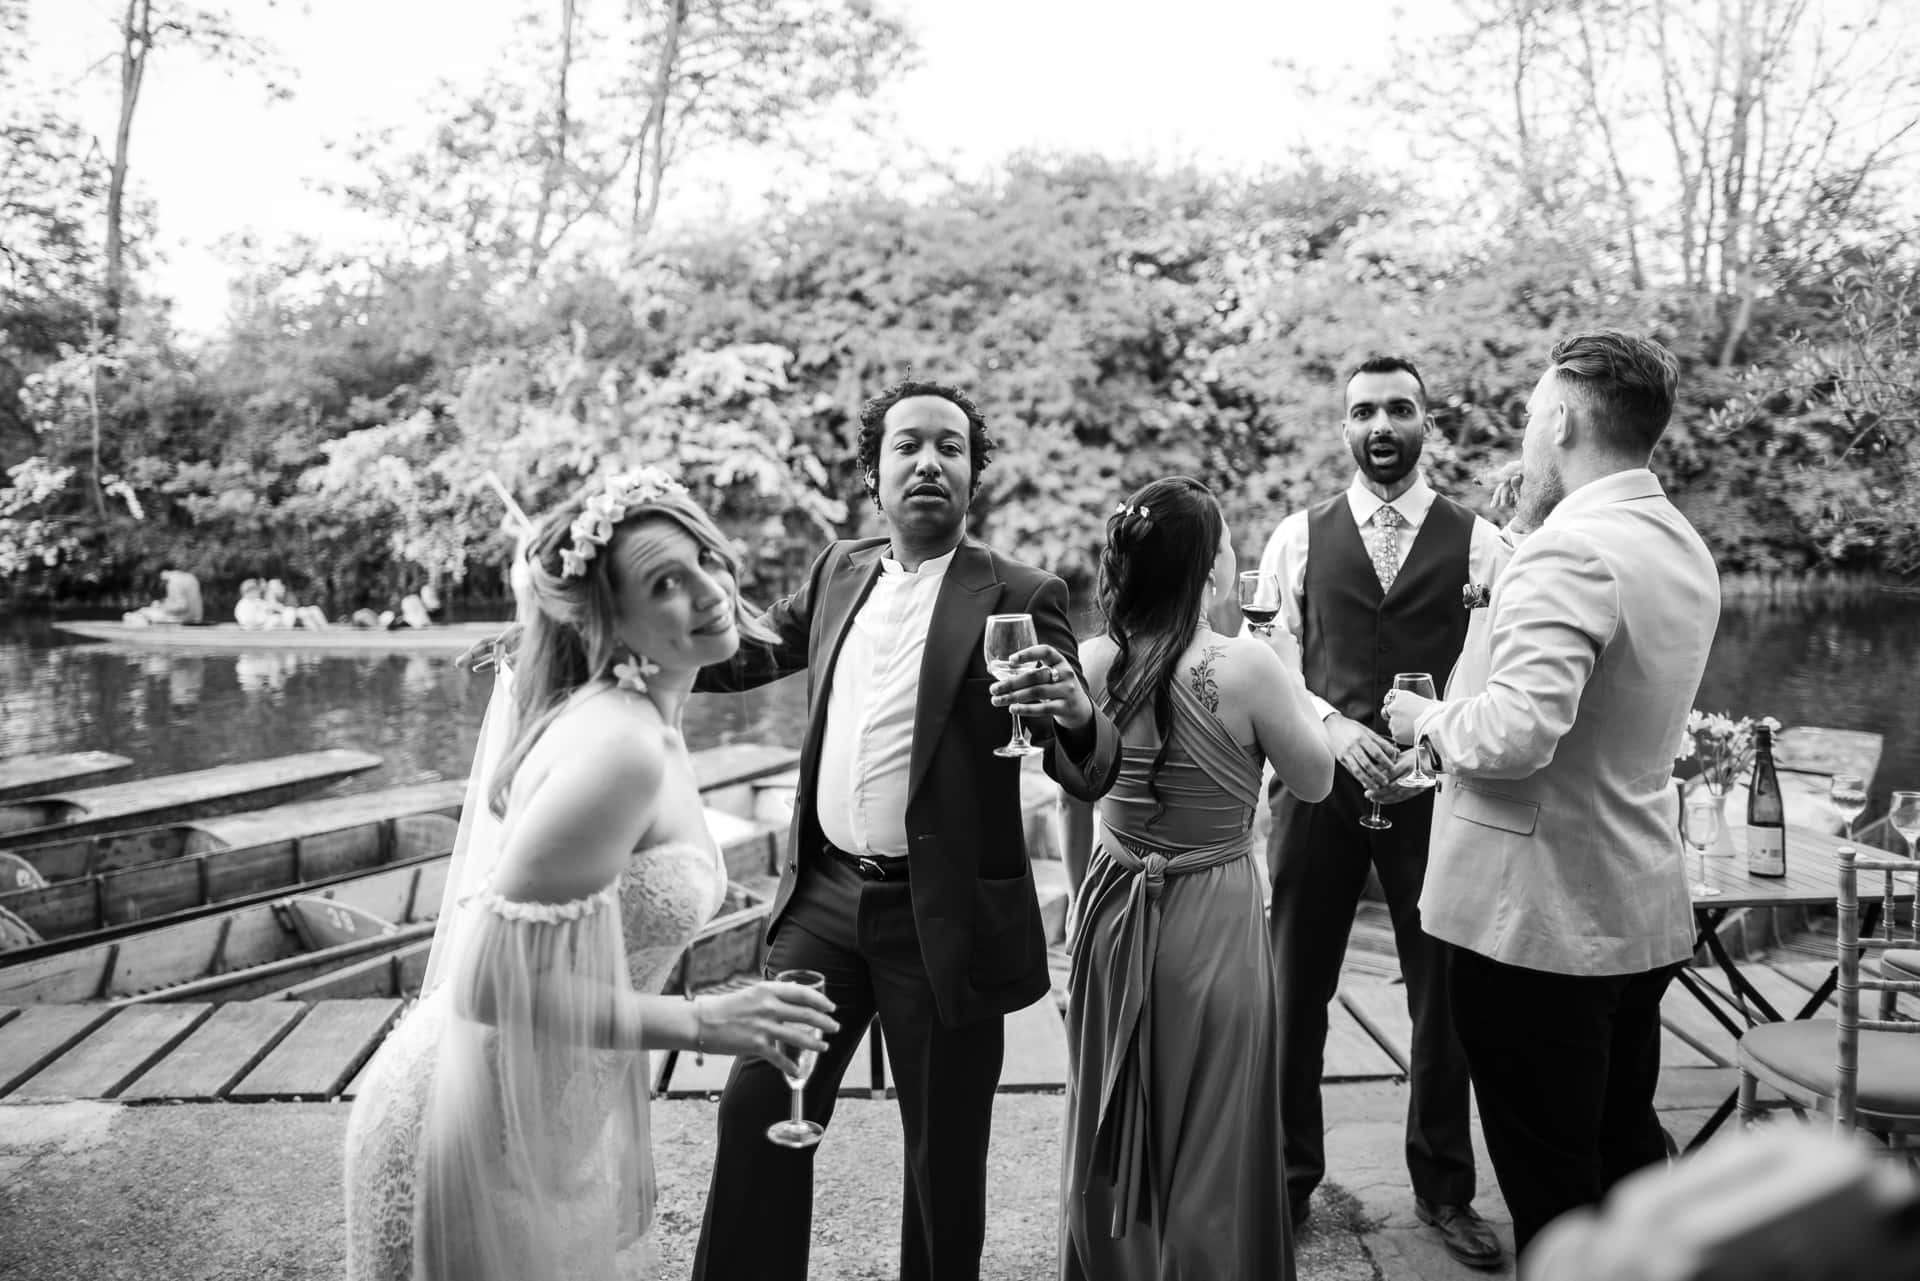 Wedding Guests and Bride having fun at the Cherwell Boathouse with the Cherwell and punts in the background.